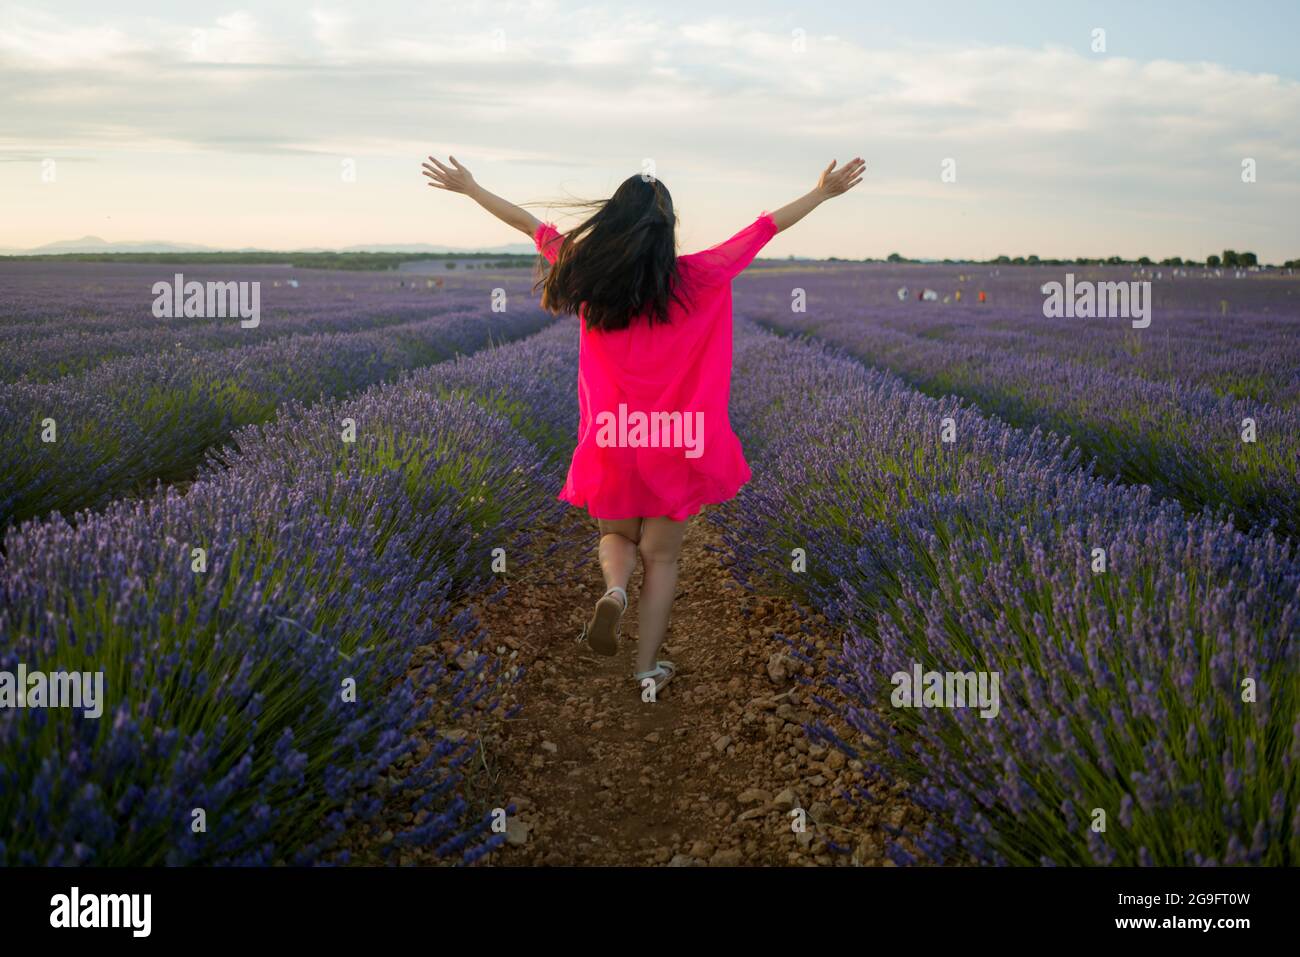 back portrait of young happy and beautiful woman in Summer dress enjoying nature running free and playful outdoors at purple lavender flowers field in Stock Photo